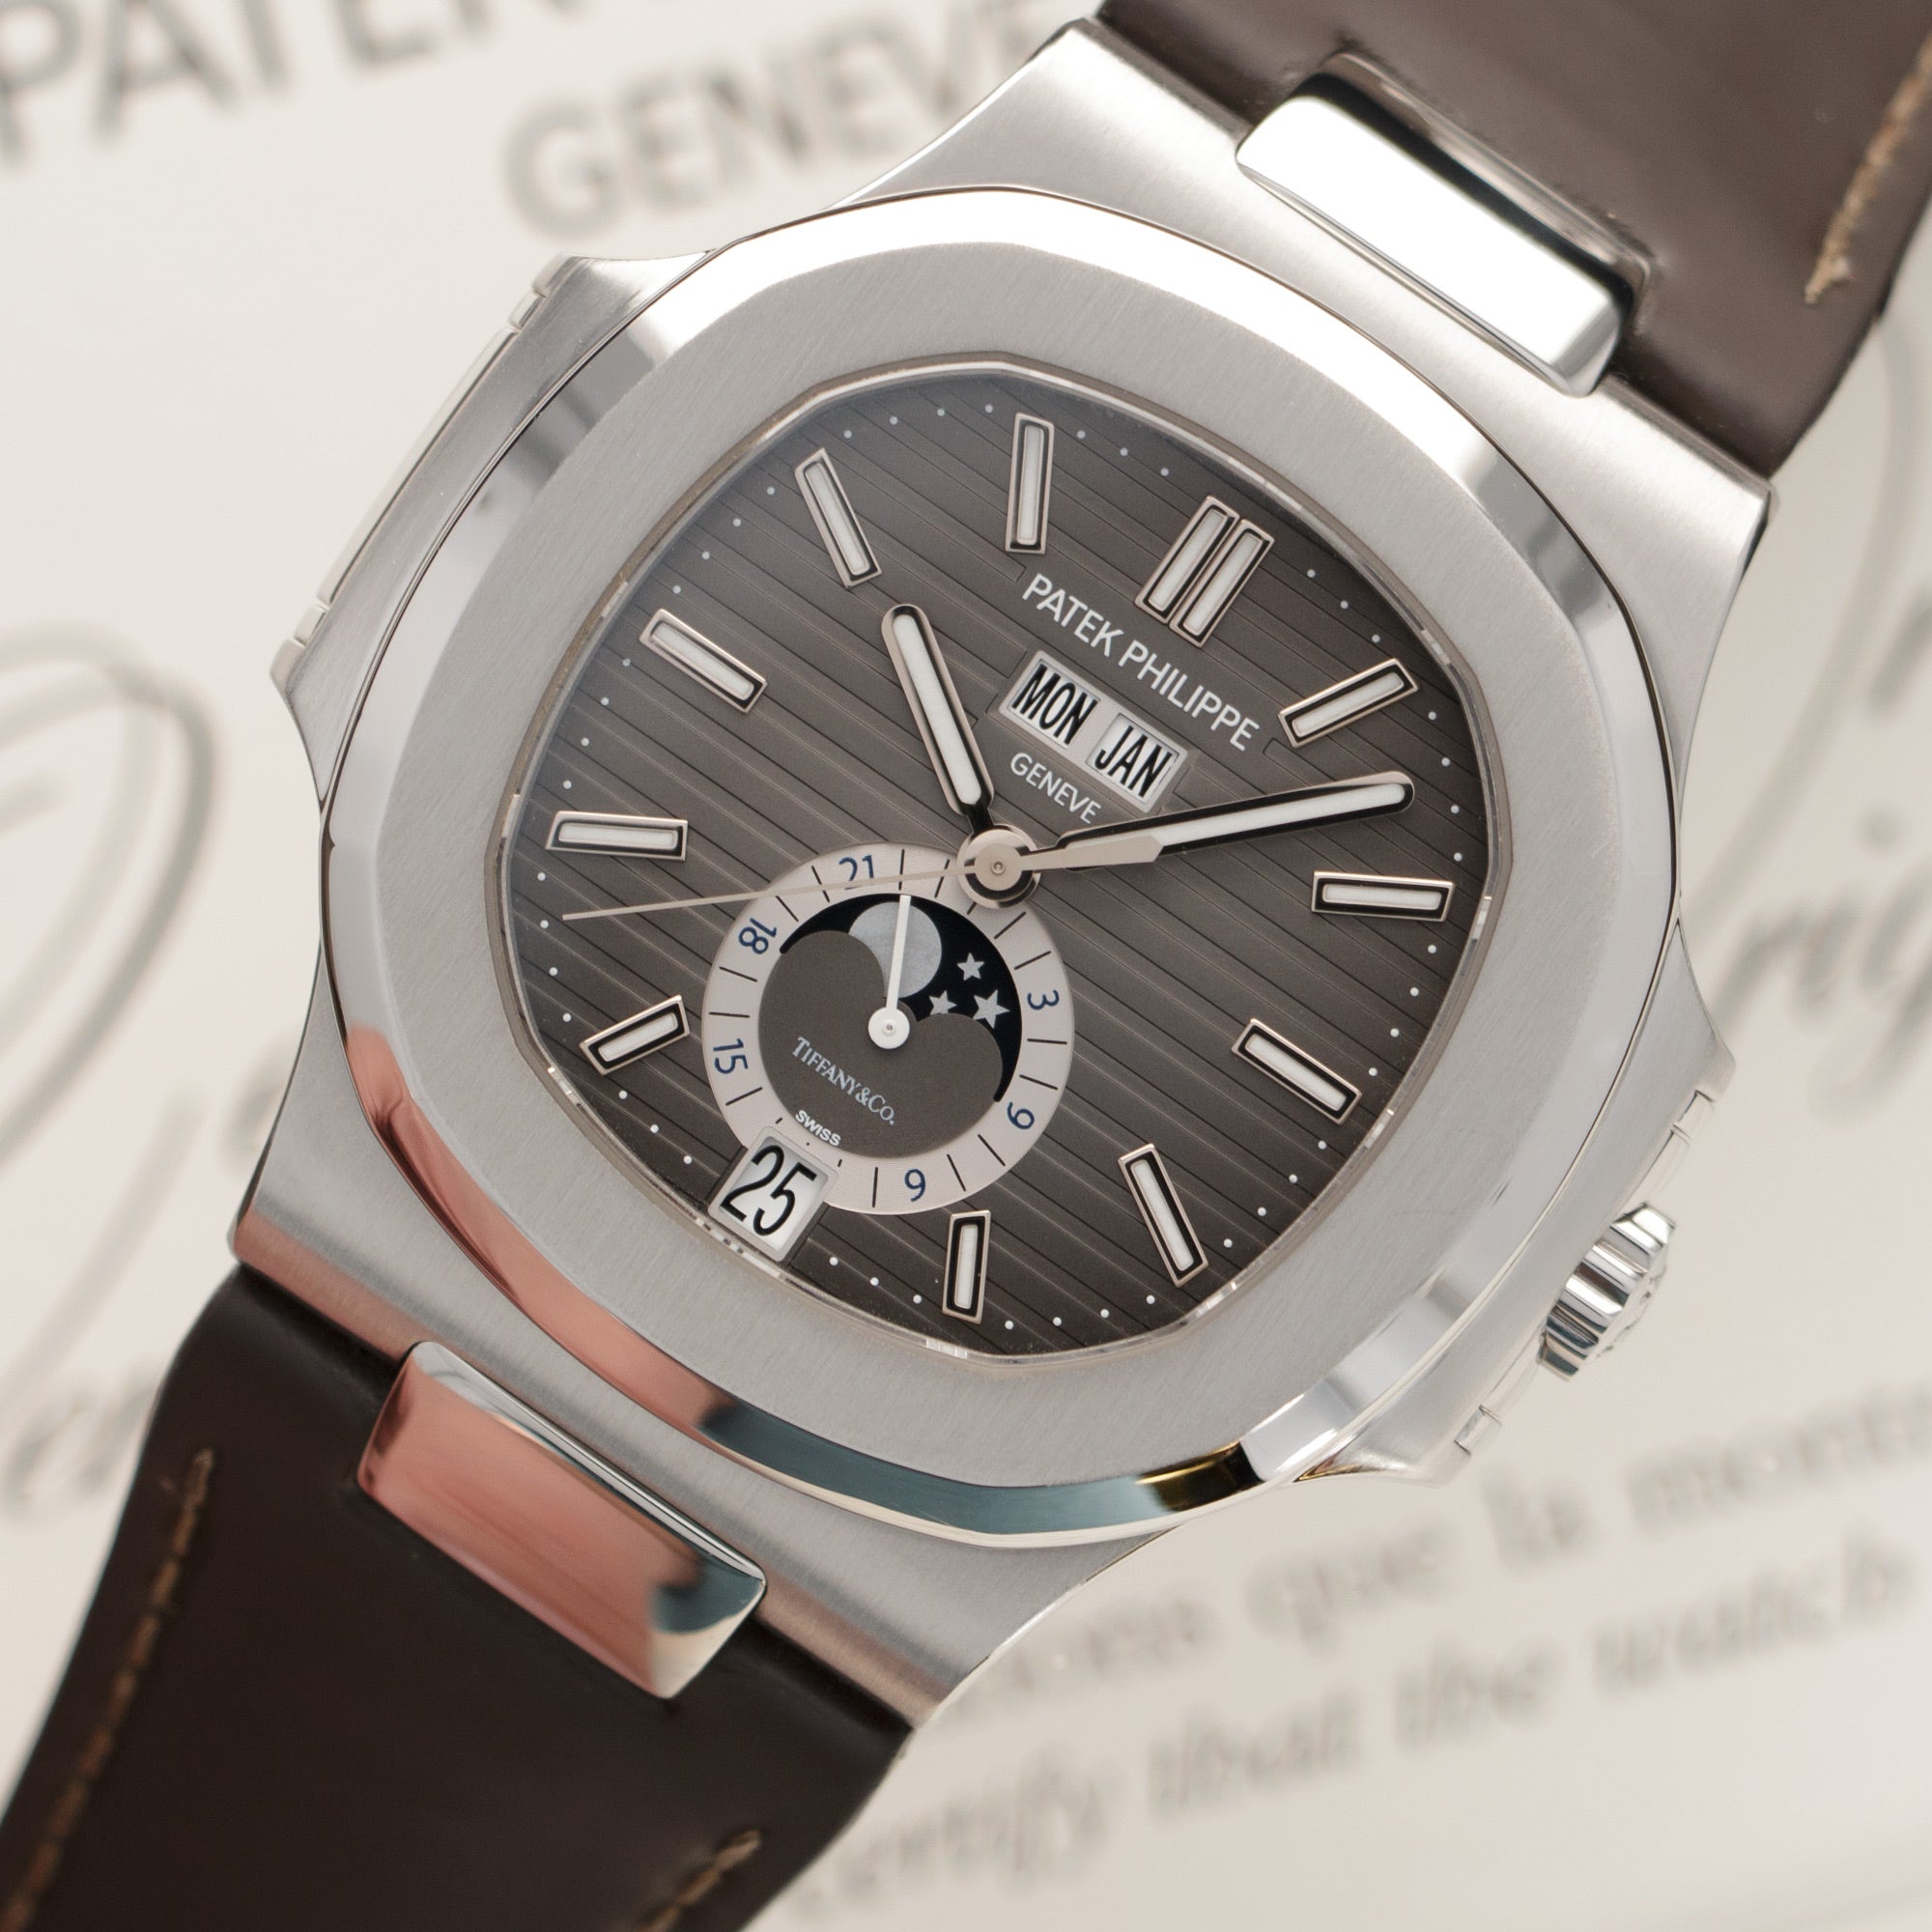 Patek Philippe 5726 Tiffany & CO. RARE SET for $419,000 for sale from a  Seller on Chrono24